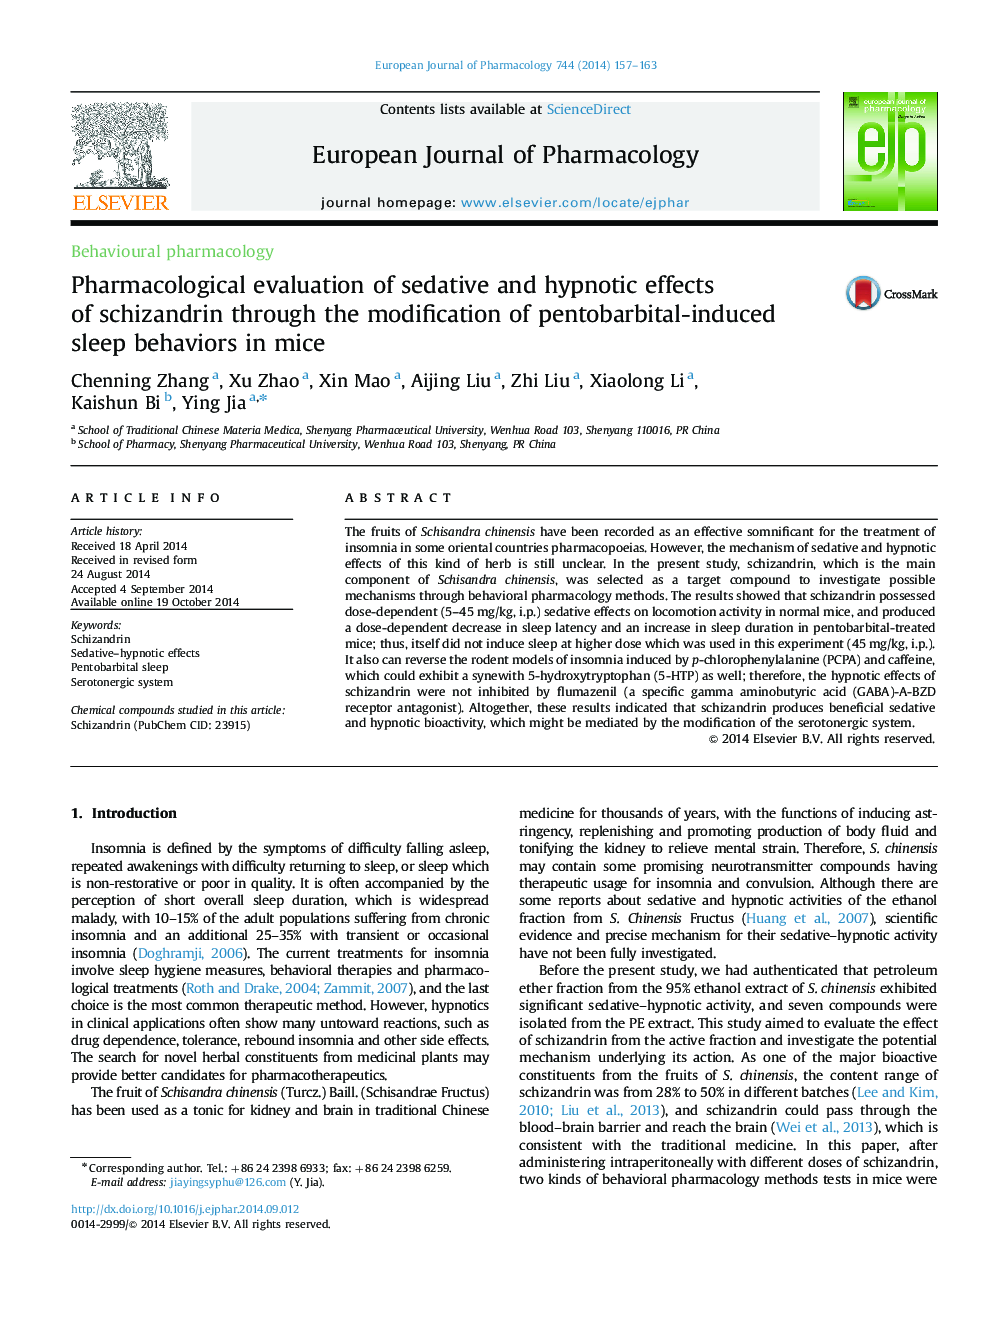 Pharmacological evaluation of sedative and hypnotic effects of schizandrin through the modification of pentobarbital-induced sleep behaviors in mice